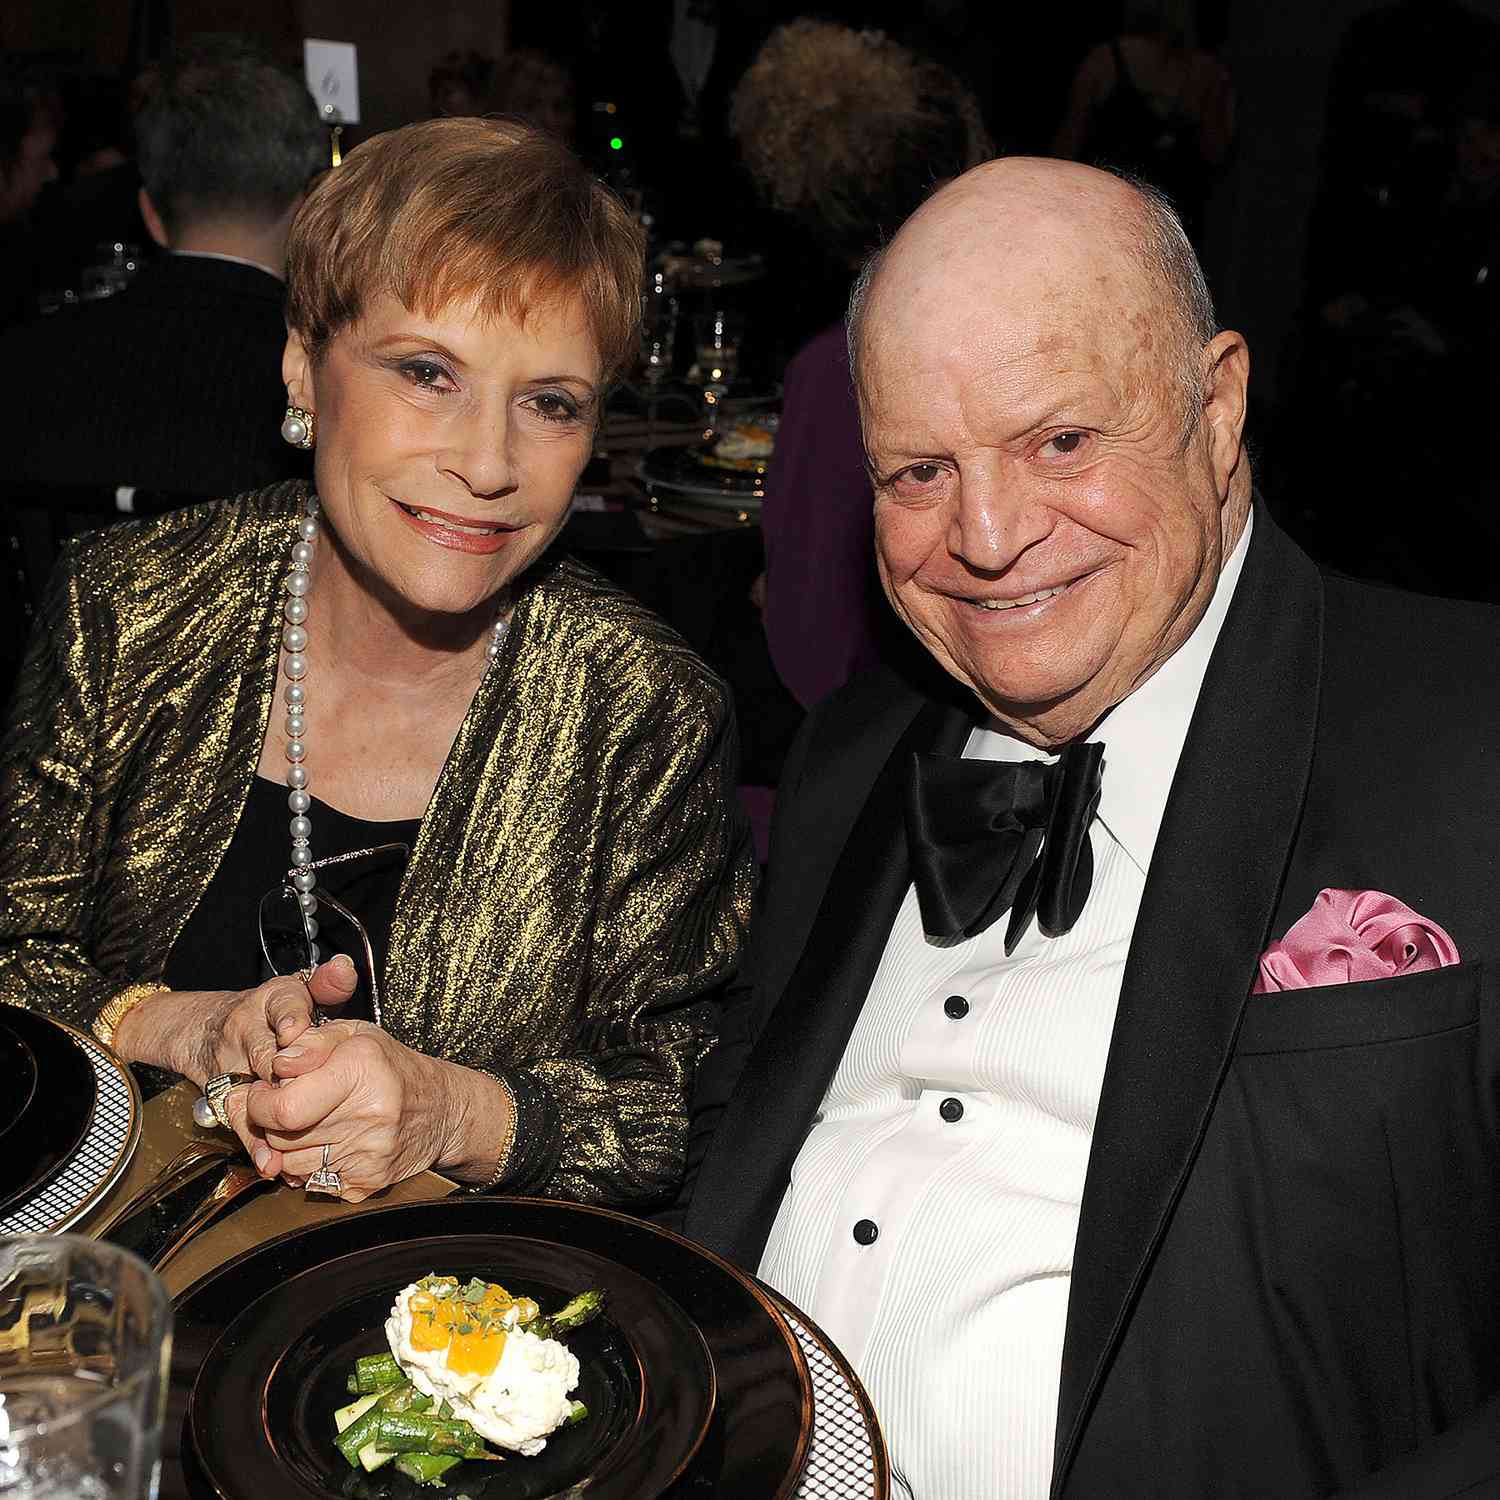 Don Rickles With&nbsp;Barbara Rickles at Comedy Central's Comedy Awards 2012 in New York City&nbsp;on April 28, 2012&nbsp;